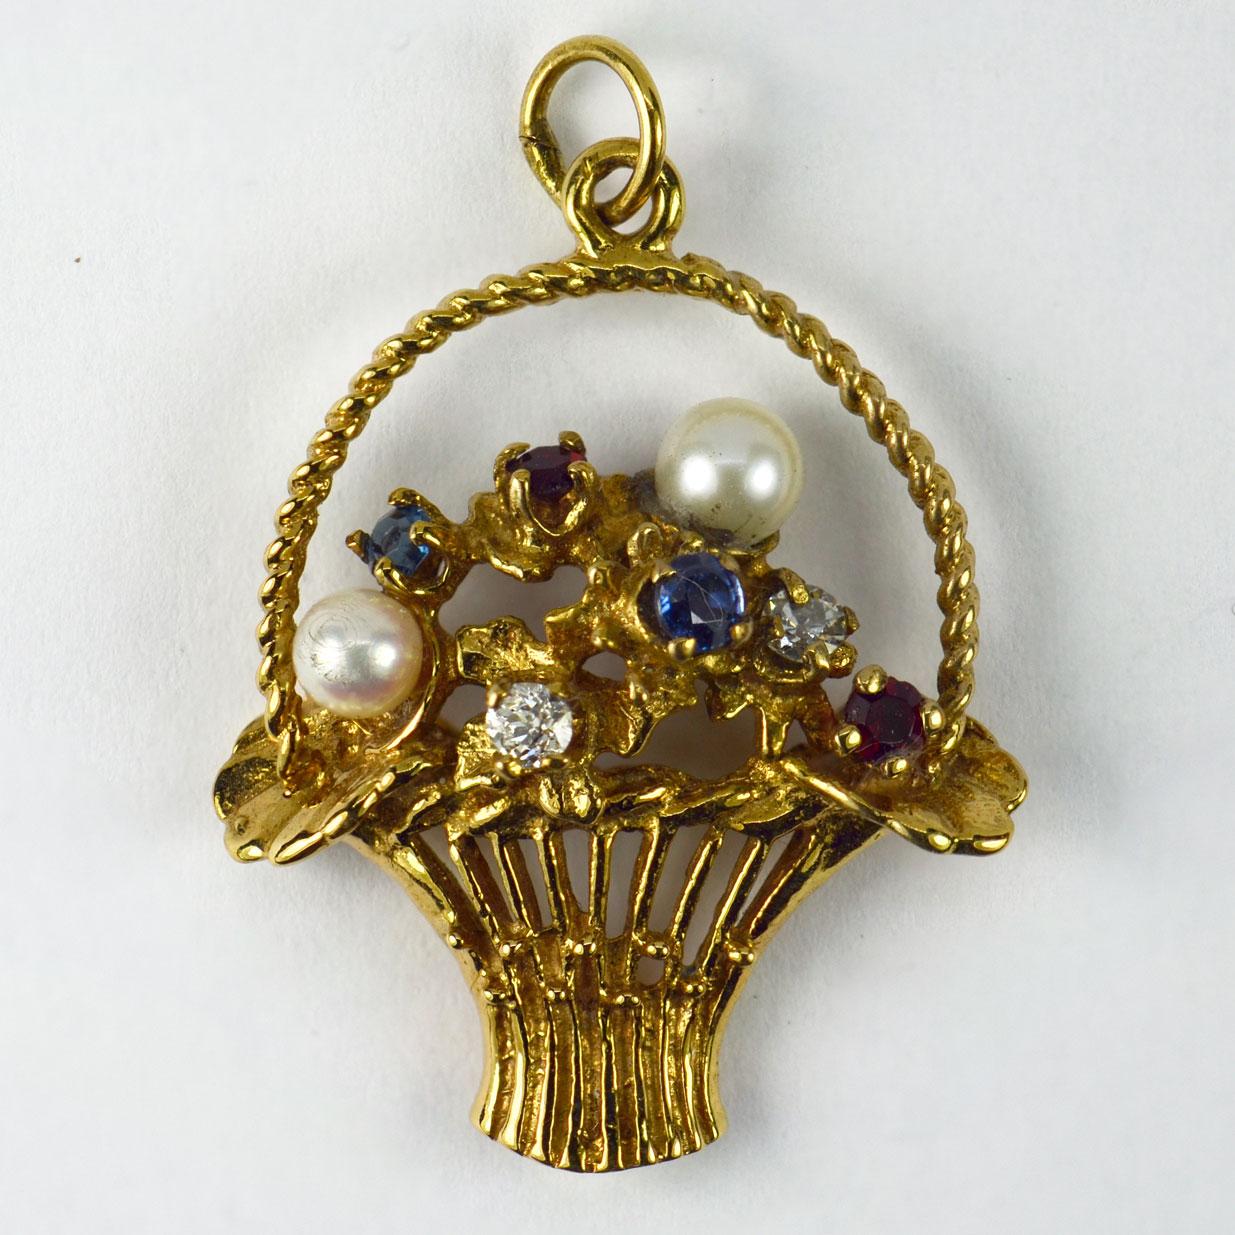 Flower Basket 14 Karat Yellow Gold Gem Set Charm Pendant In Good Condition For Sale In London, GB